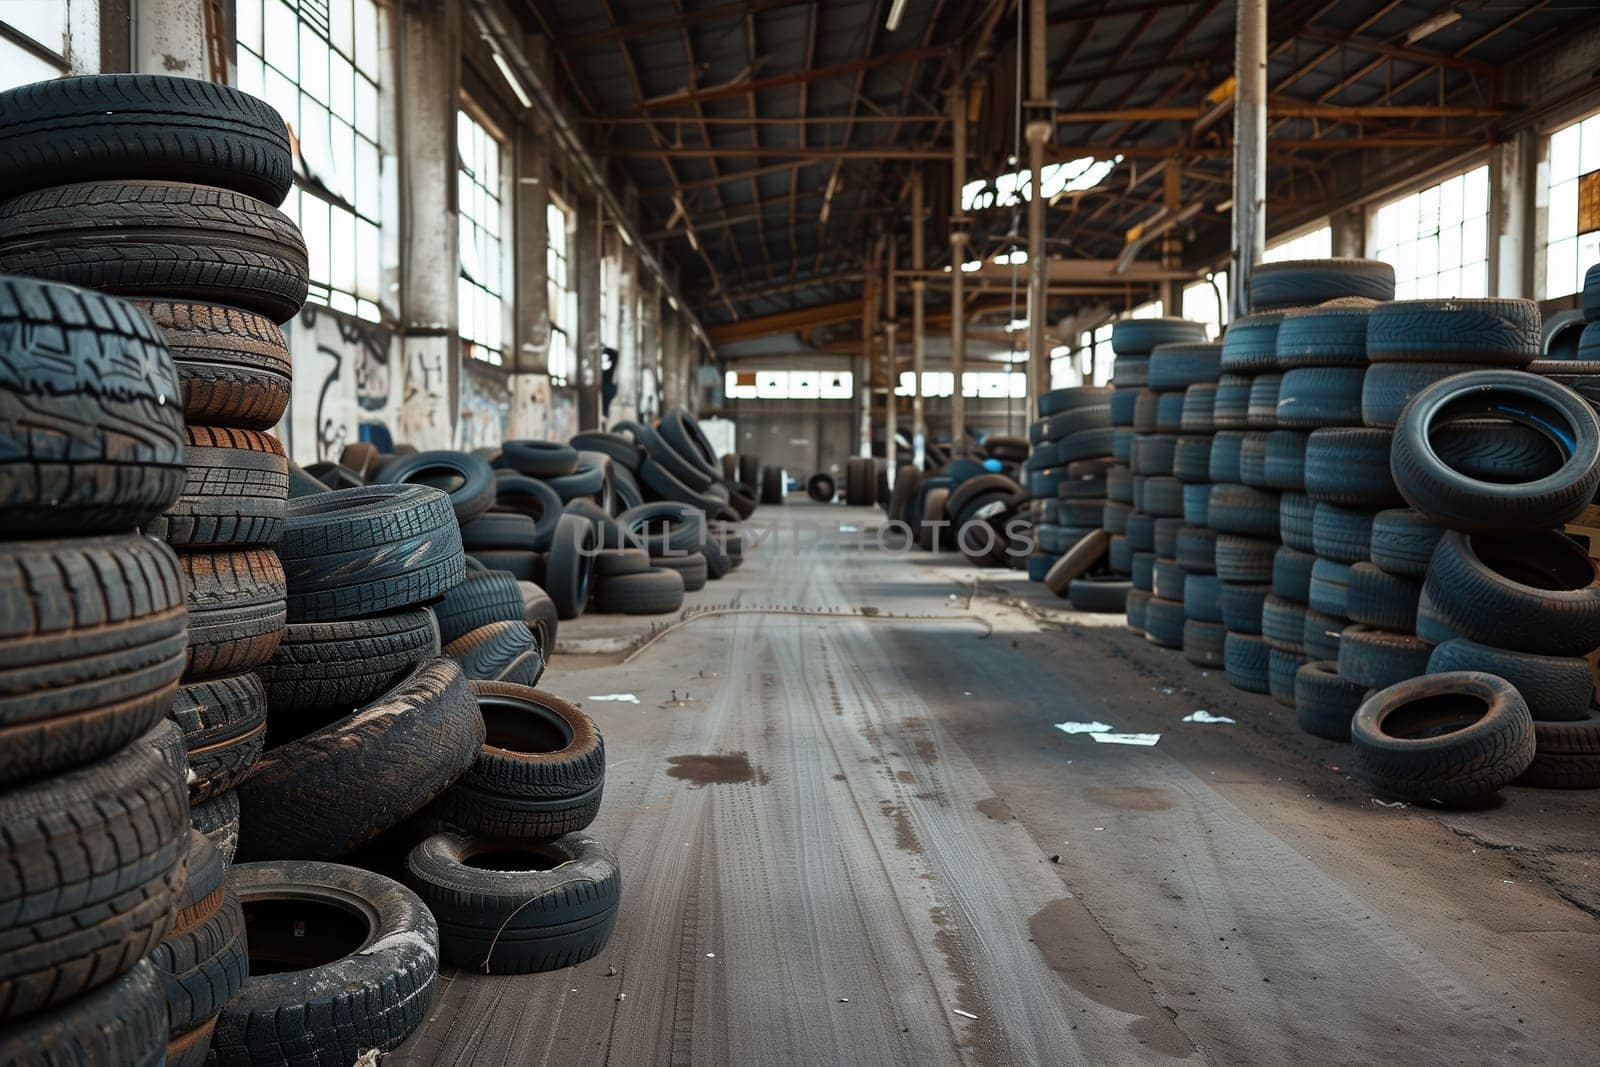 Warehouse Filled With Old Tires by Sd28DimoN_1976